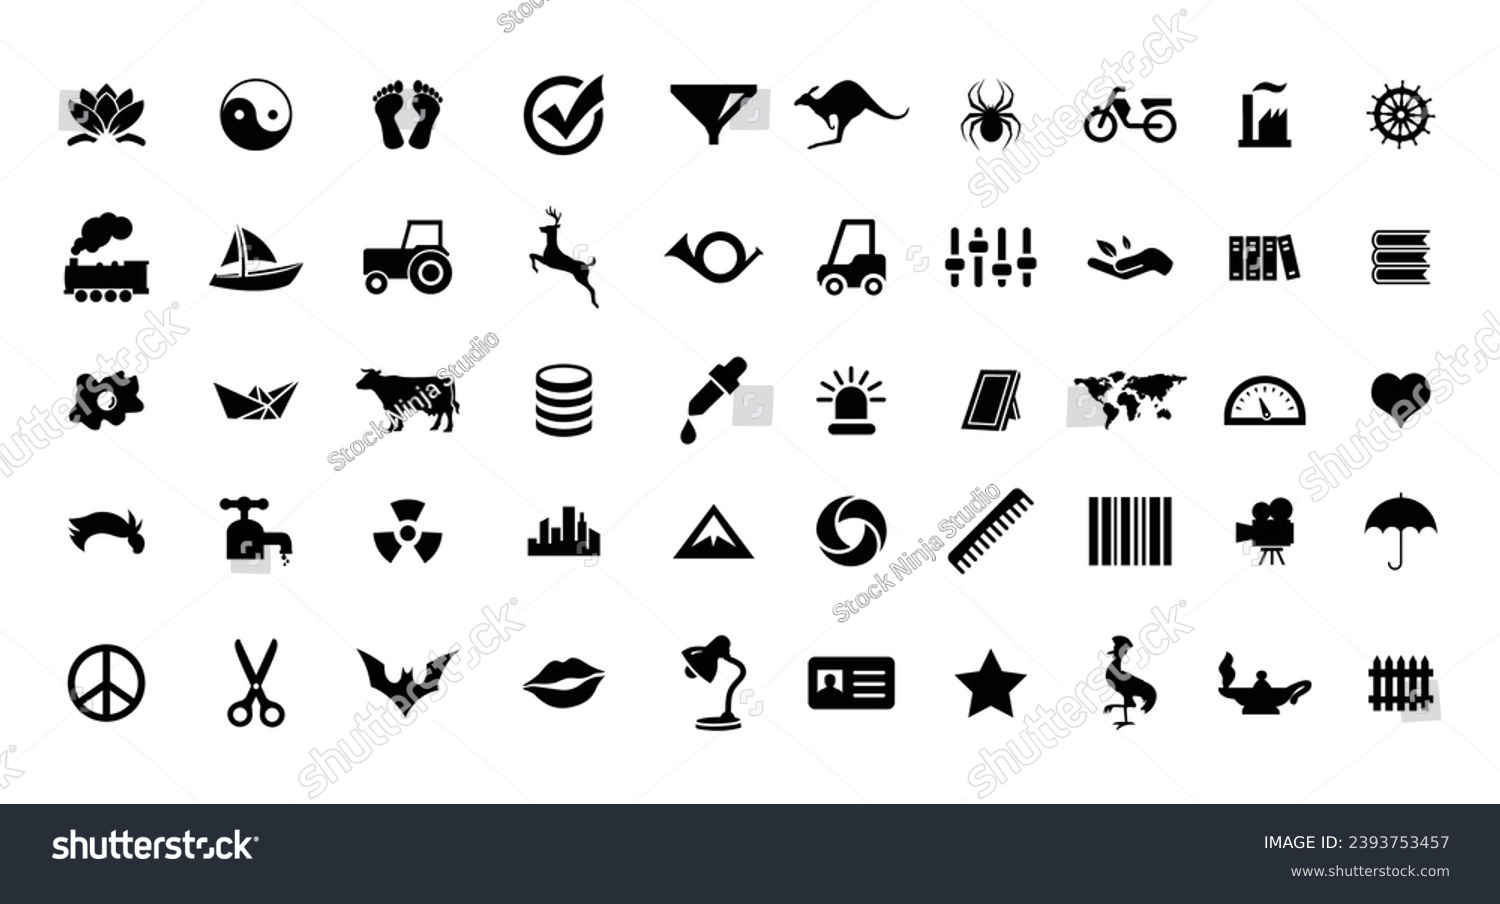 SVG of Big Icon Set: Marketing Funnel, Yin Yang, Book, Library, Peace, Star, Camera, Deer And Many More. svg